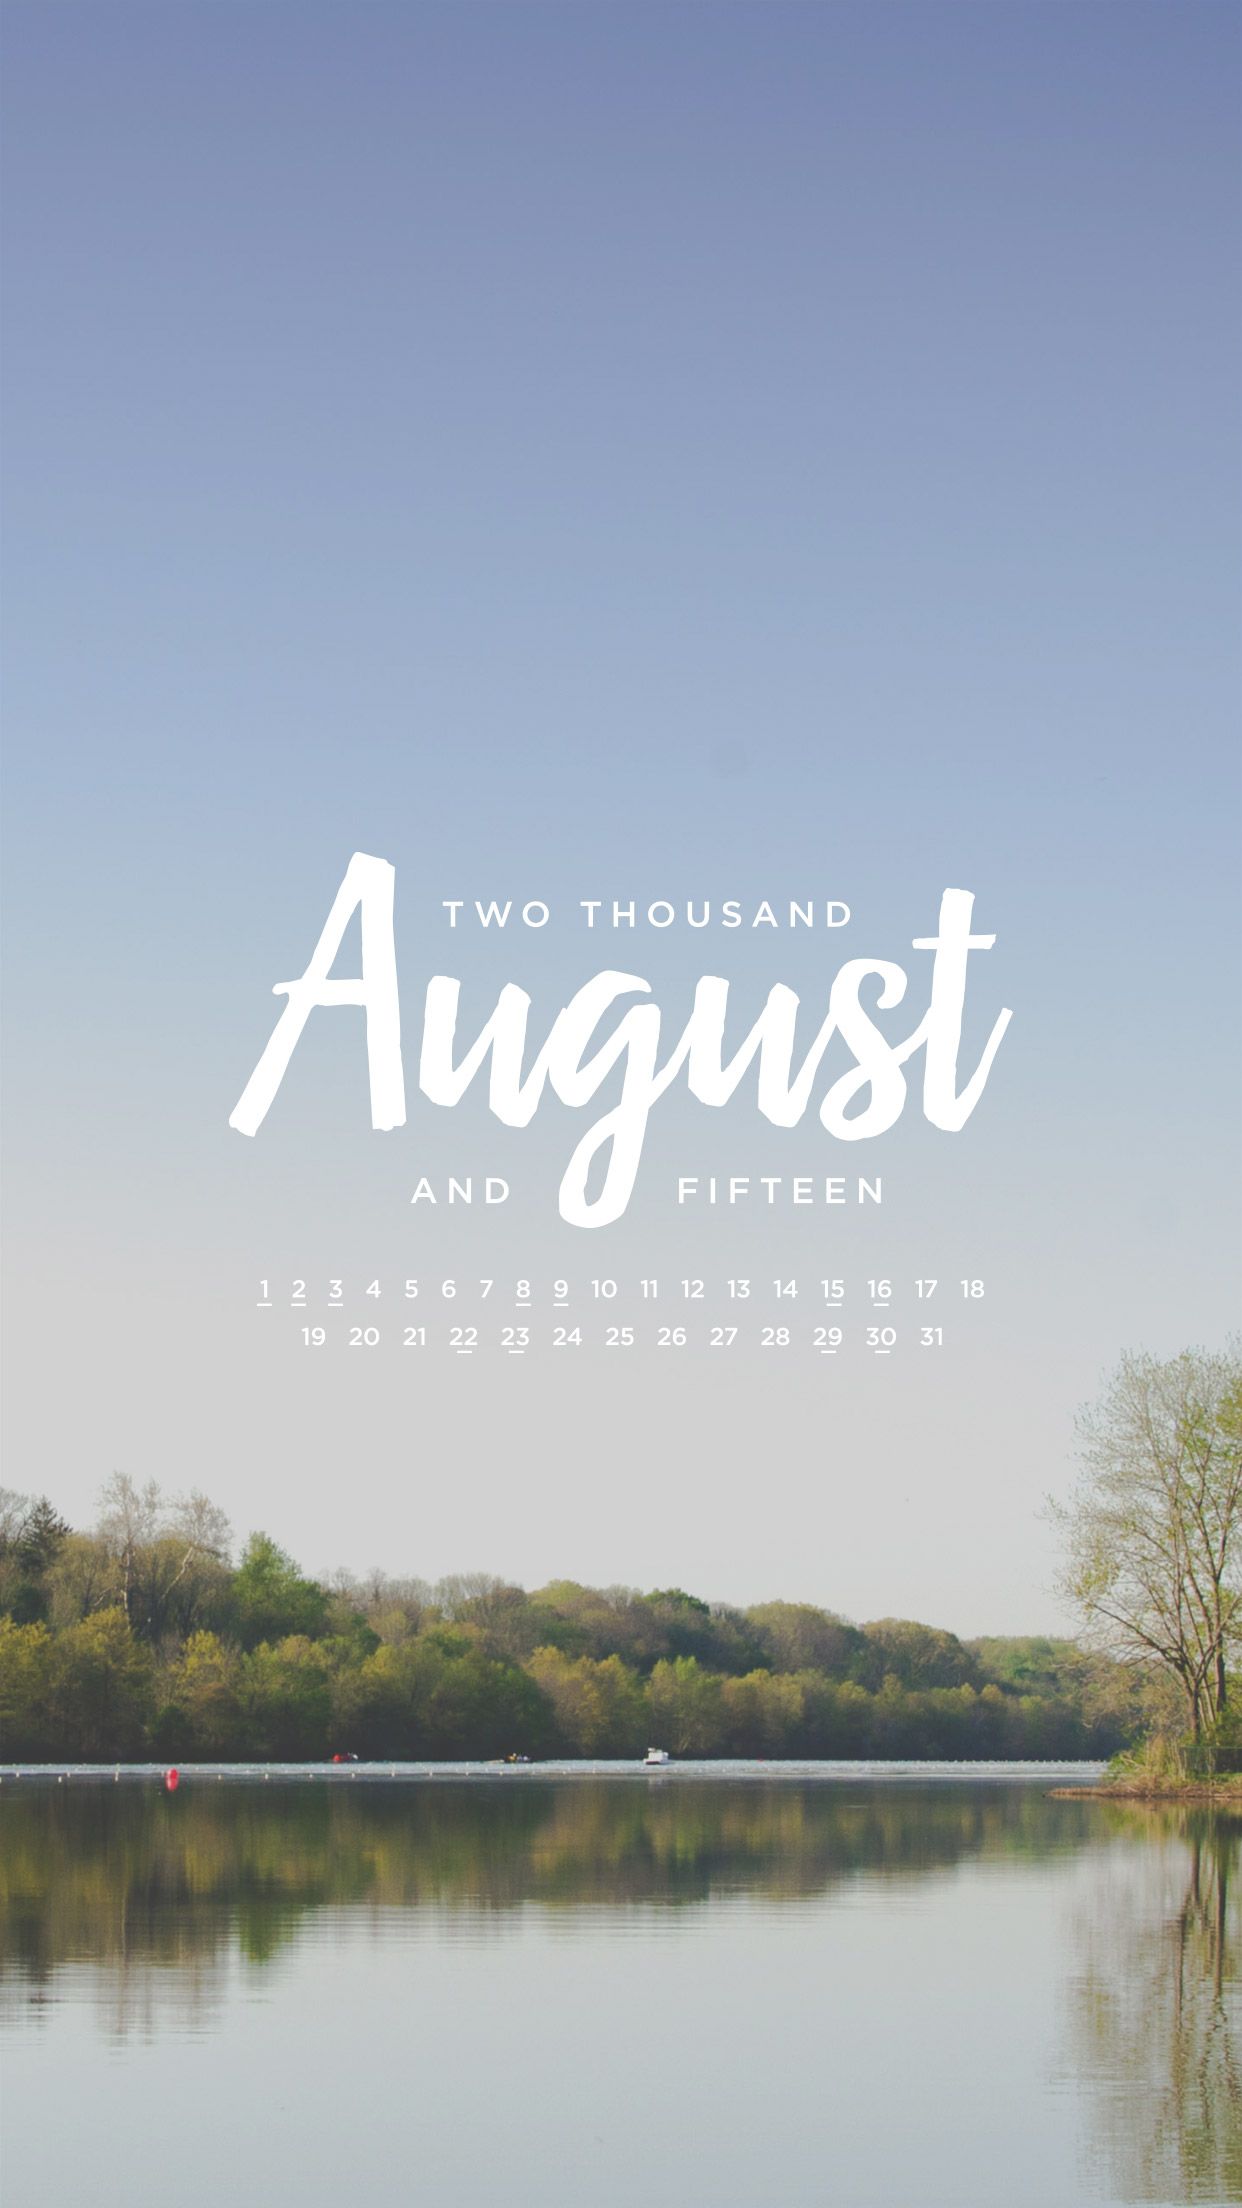 August Iphone Wallpapers